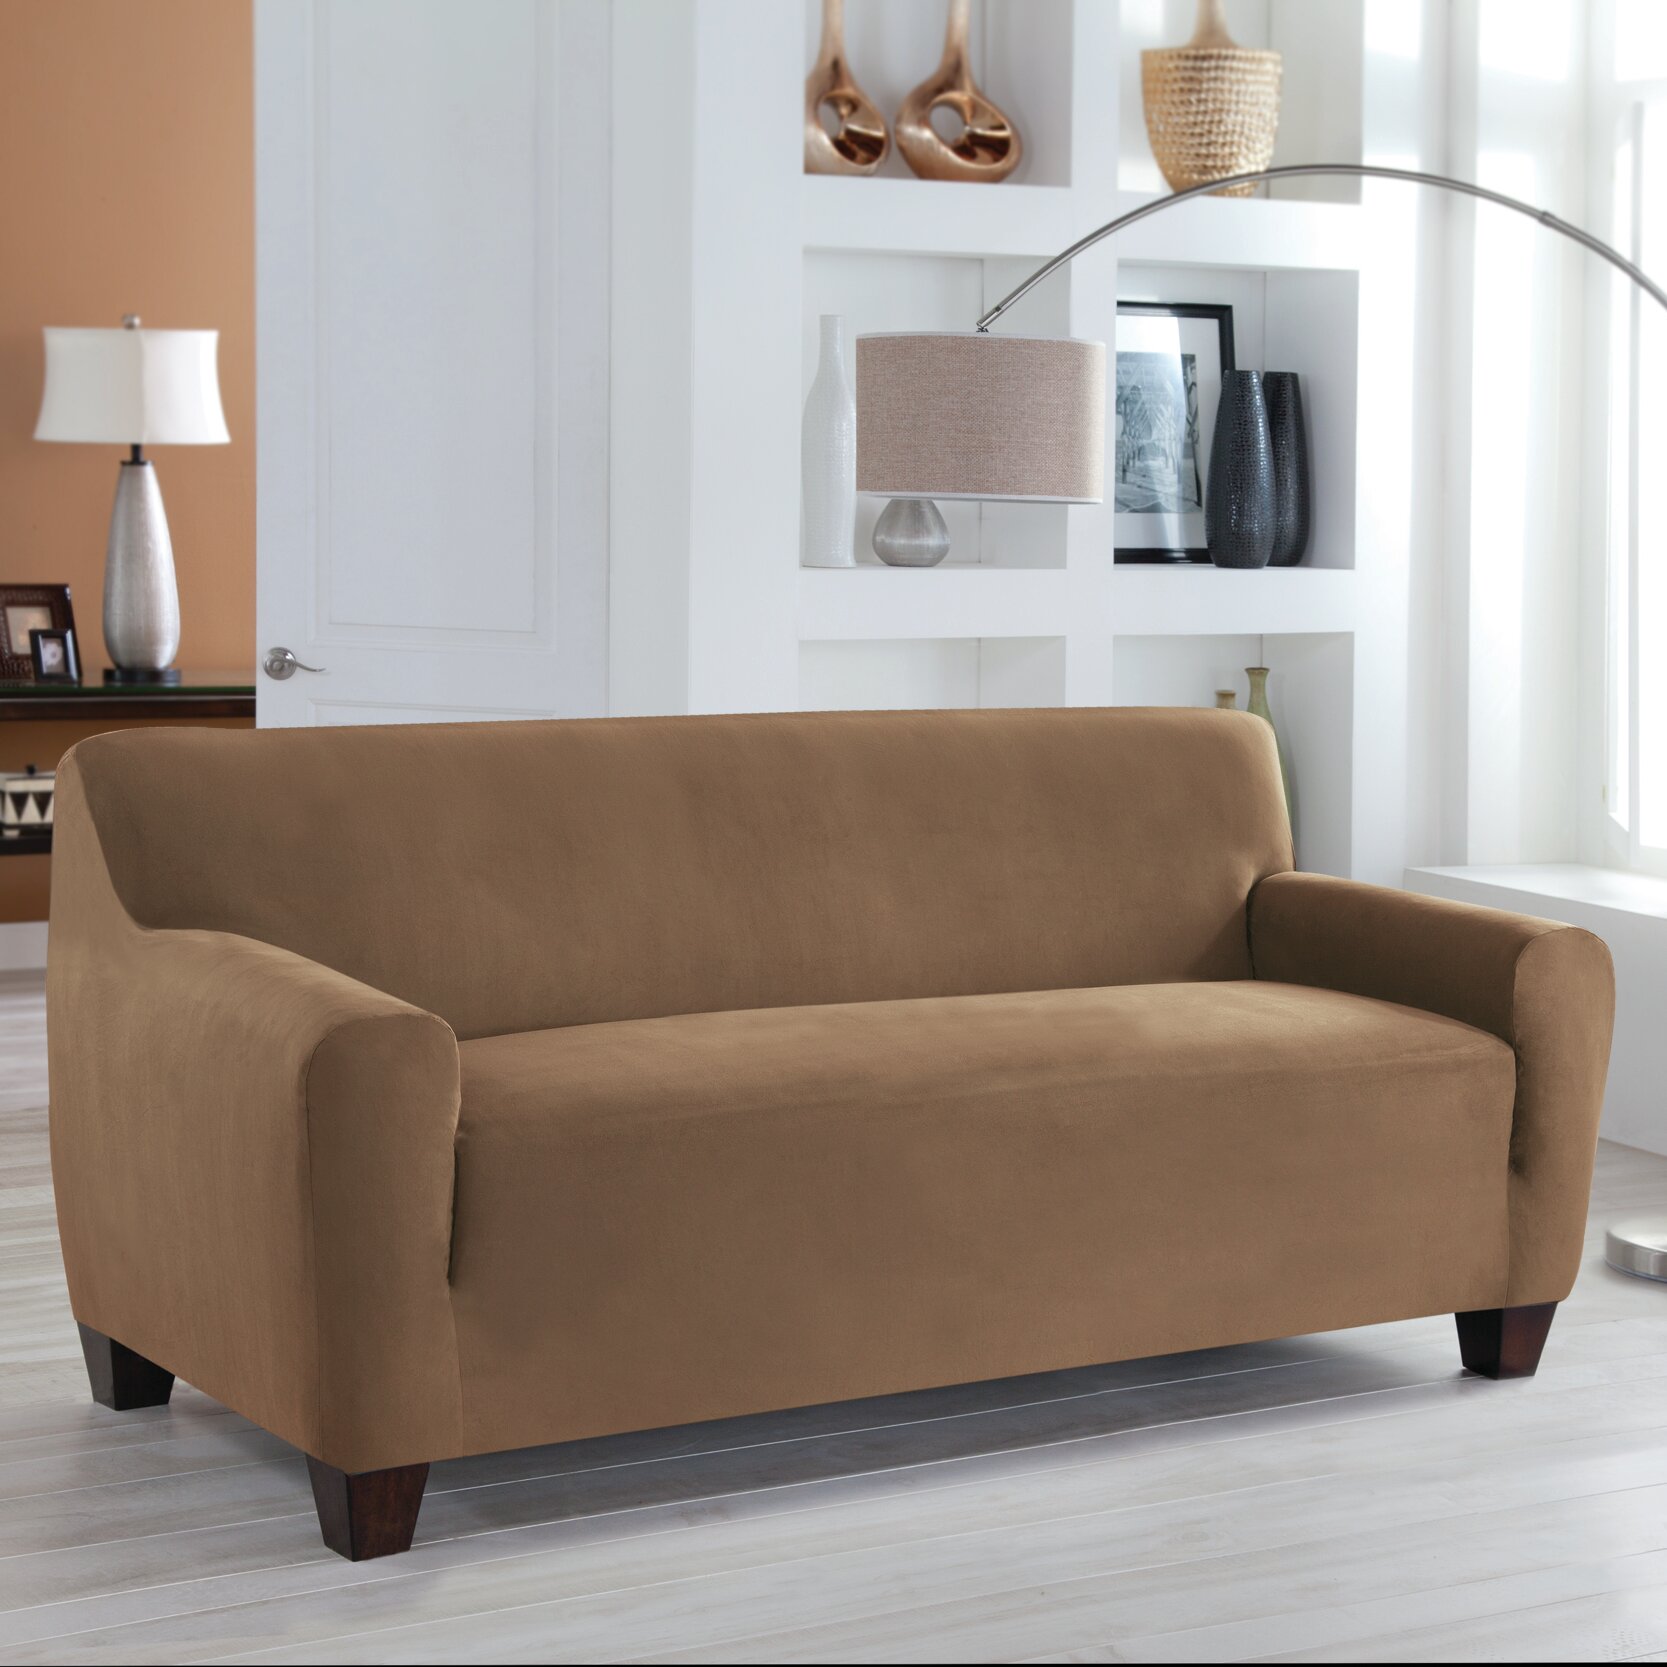 Perfect Fit Industries Tailor Fit Sofa Slipcover & Reviews